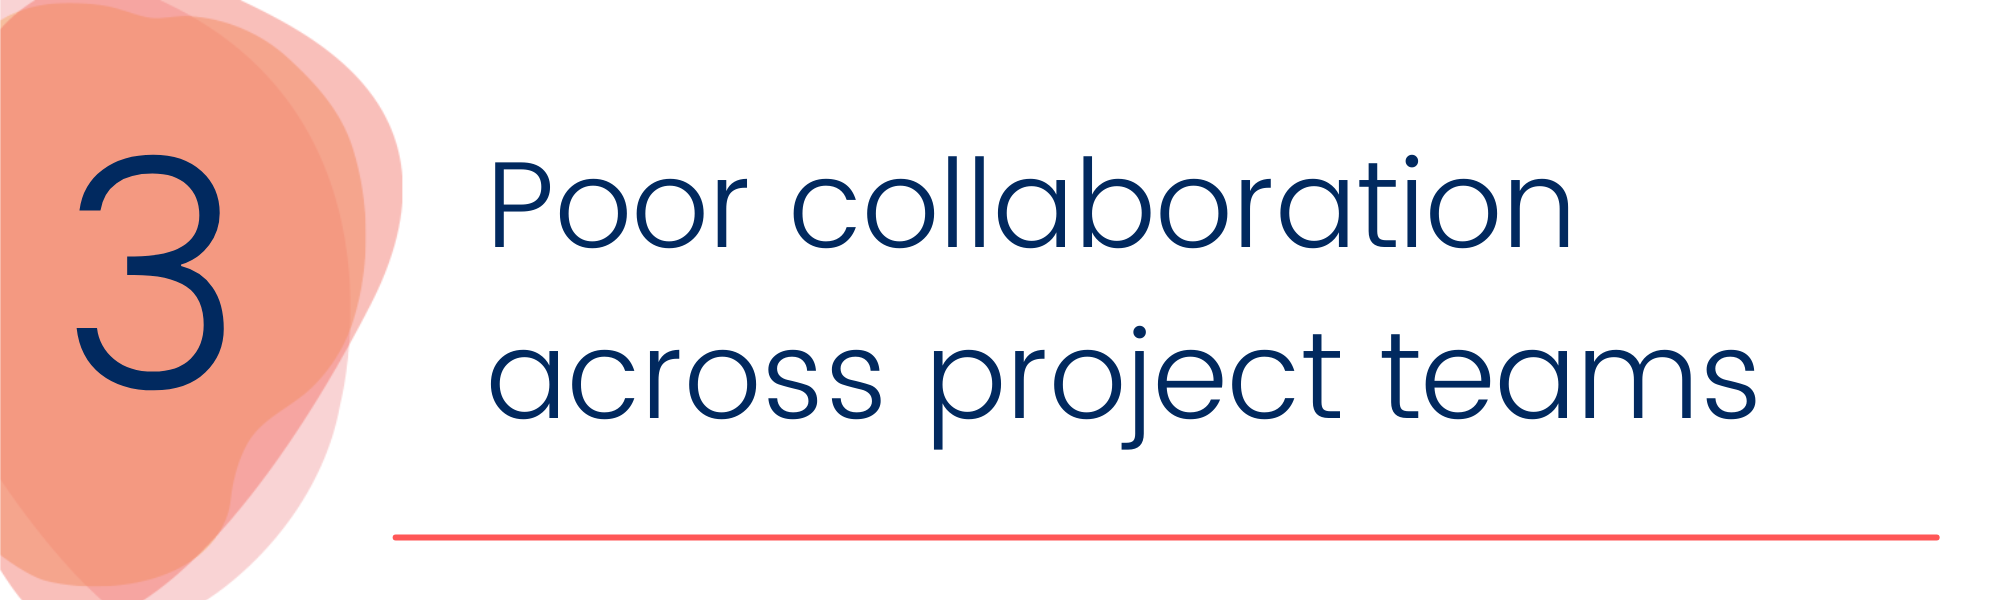 Poor Collaboration Across Project Teams